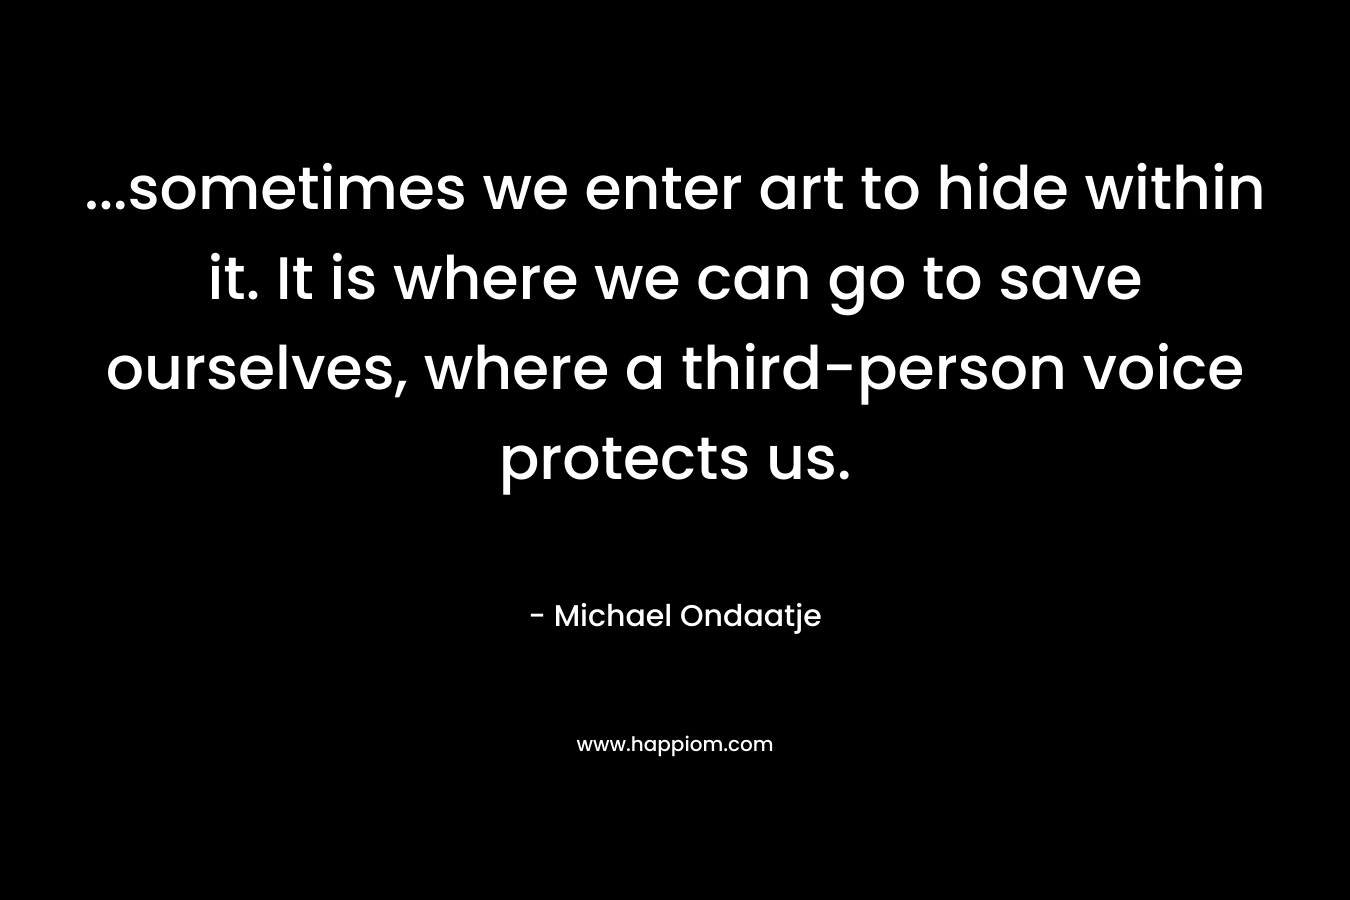 ...sometimes we enter art to hide within it. It is where we can go to save ourselves, where a third-person voice protects us.